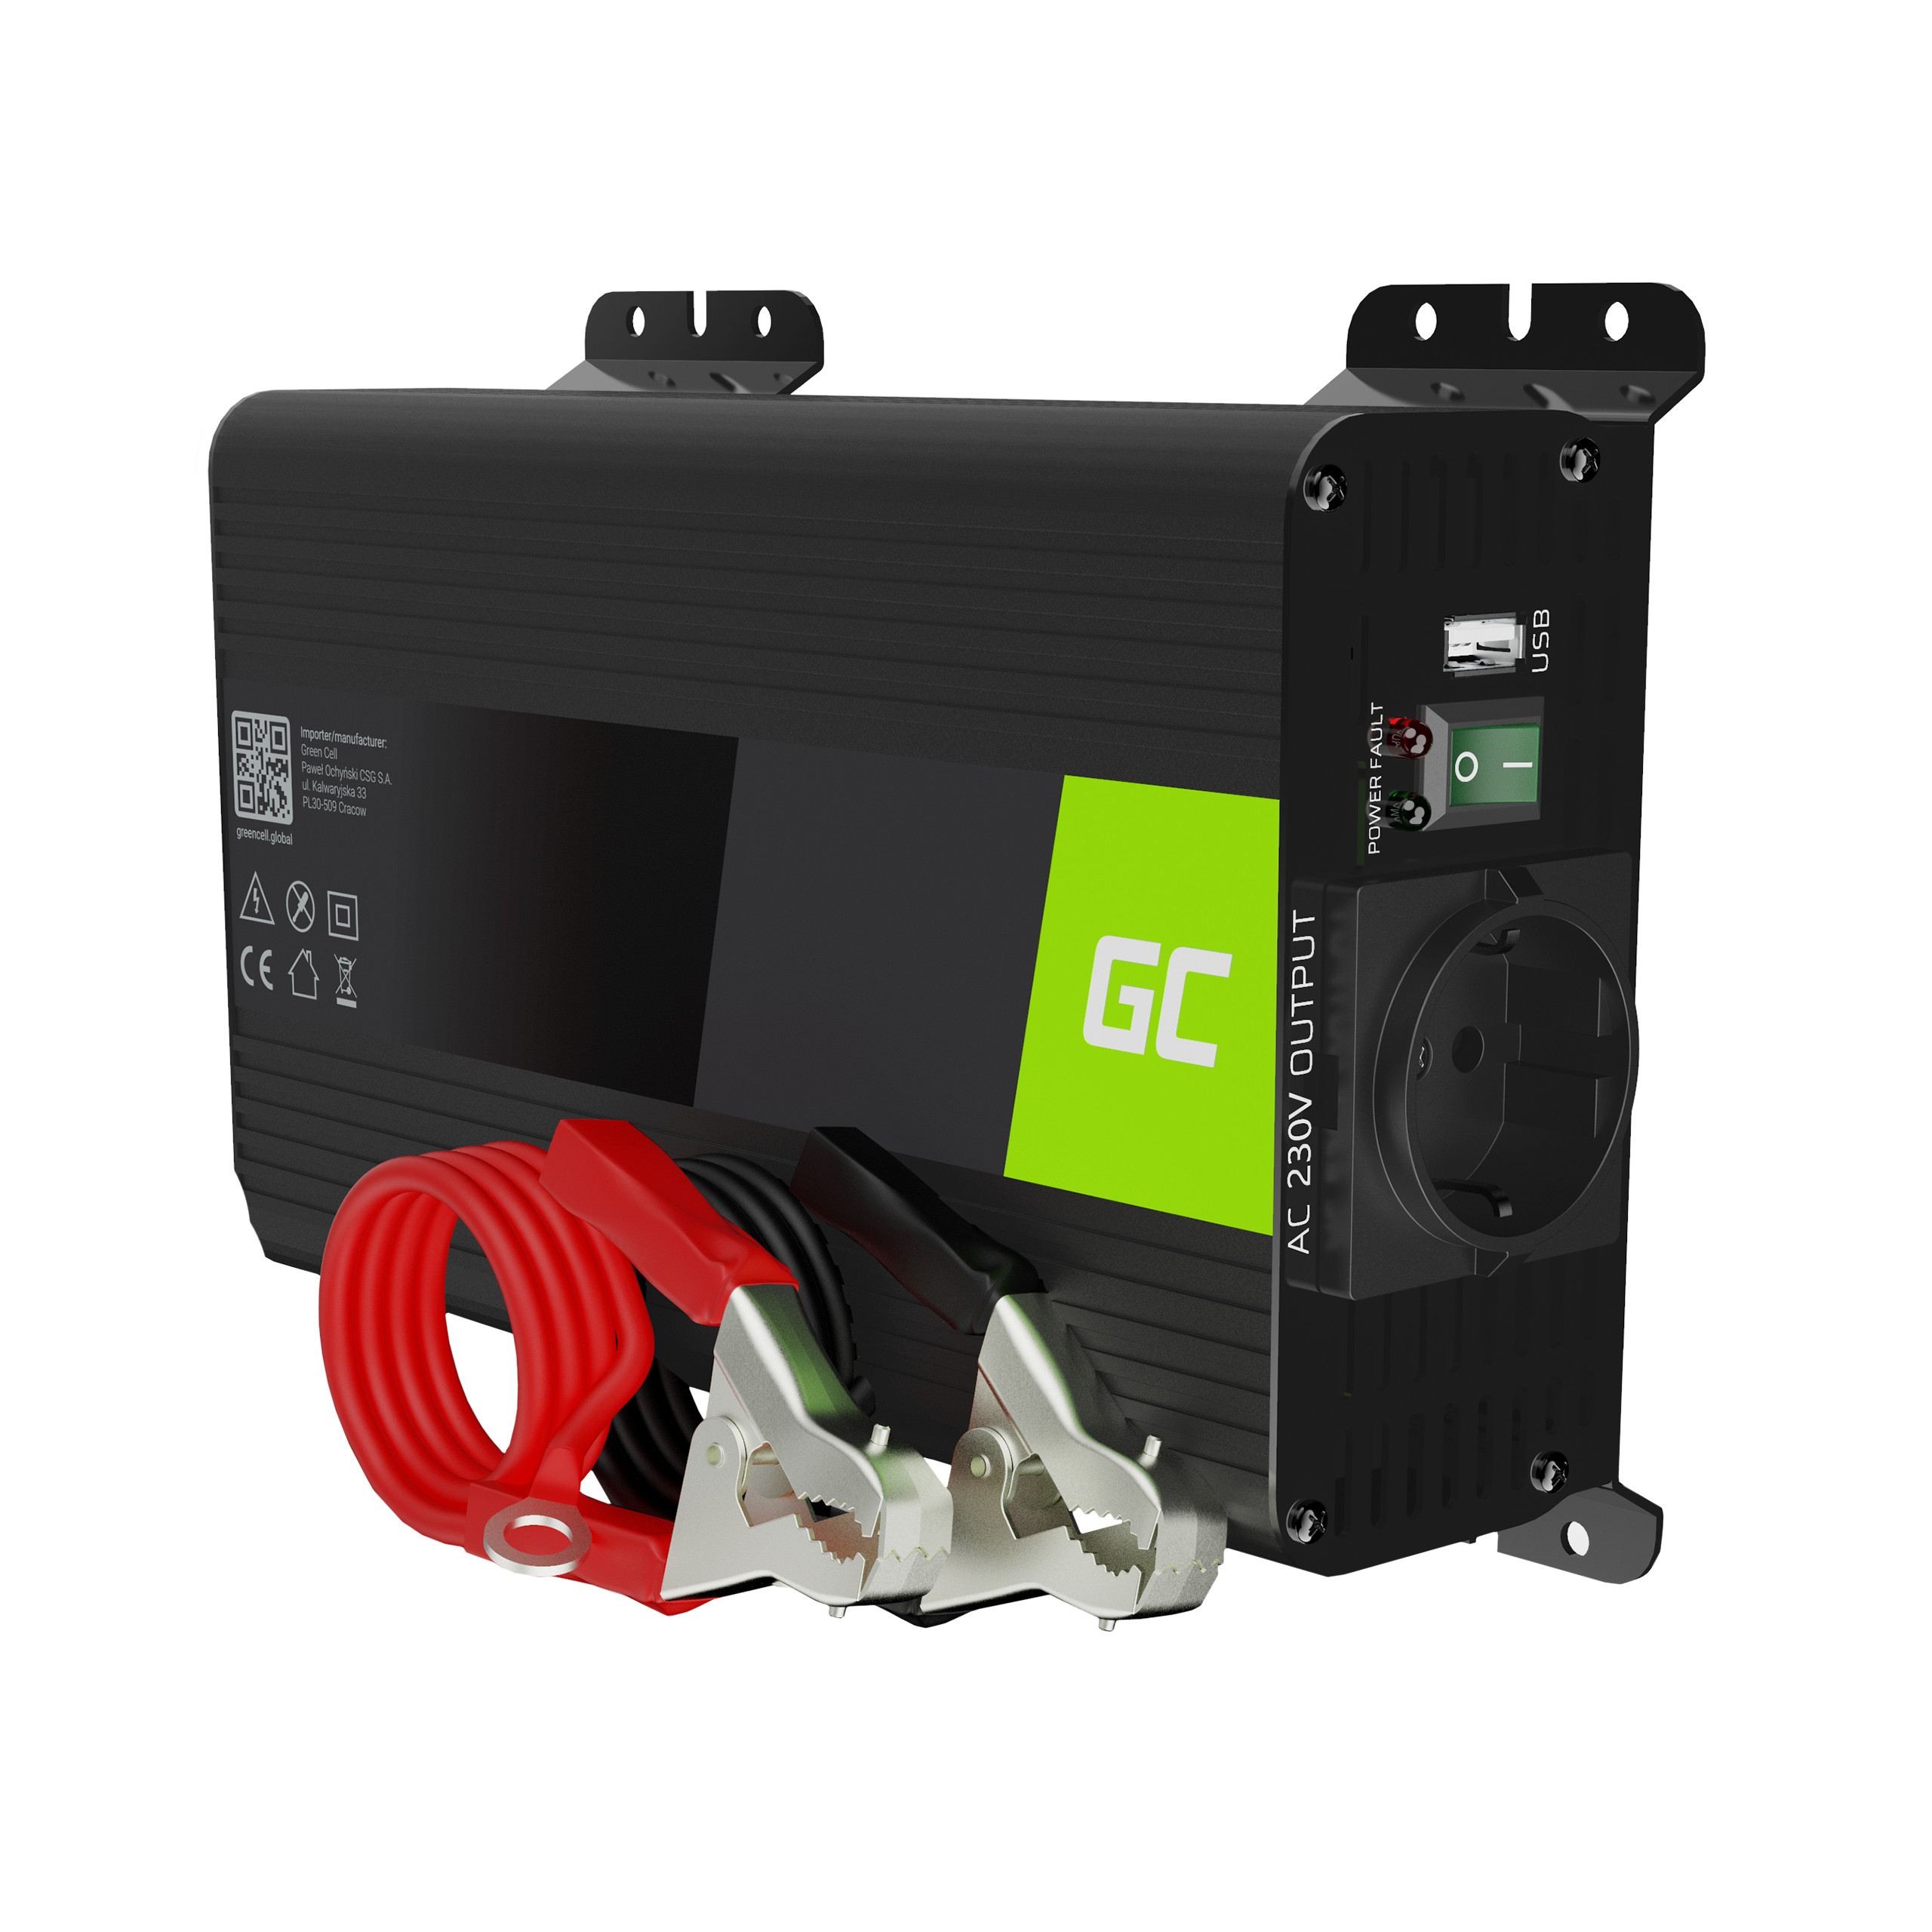 Mains inverter pure sinewave 300w - Use your petrol/diesel car to provide  electricity